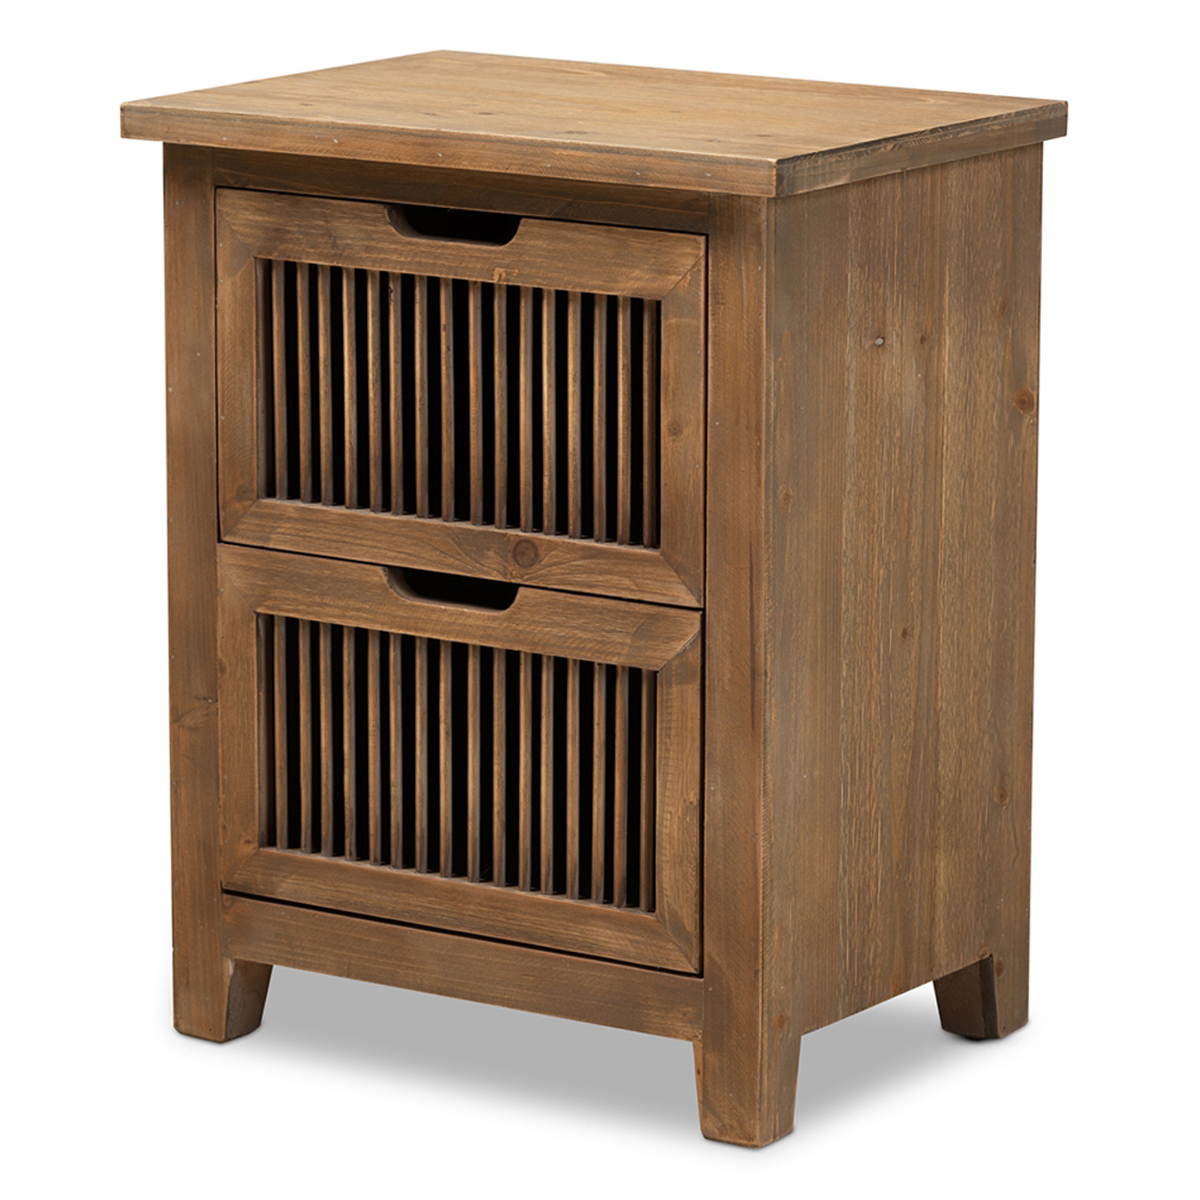 Baxton Studio Clement 2-Drawer Wood Spindle Nightstand